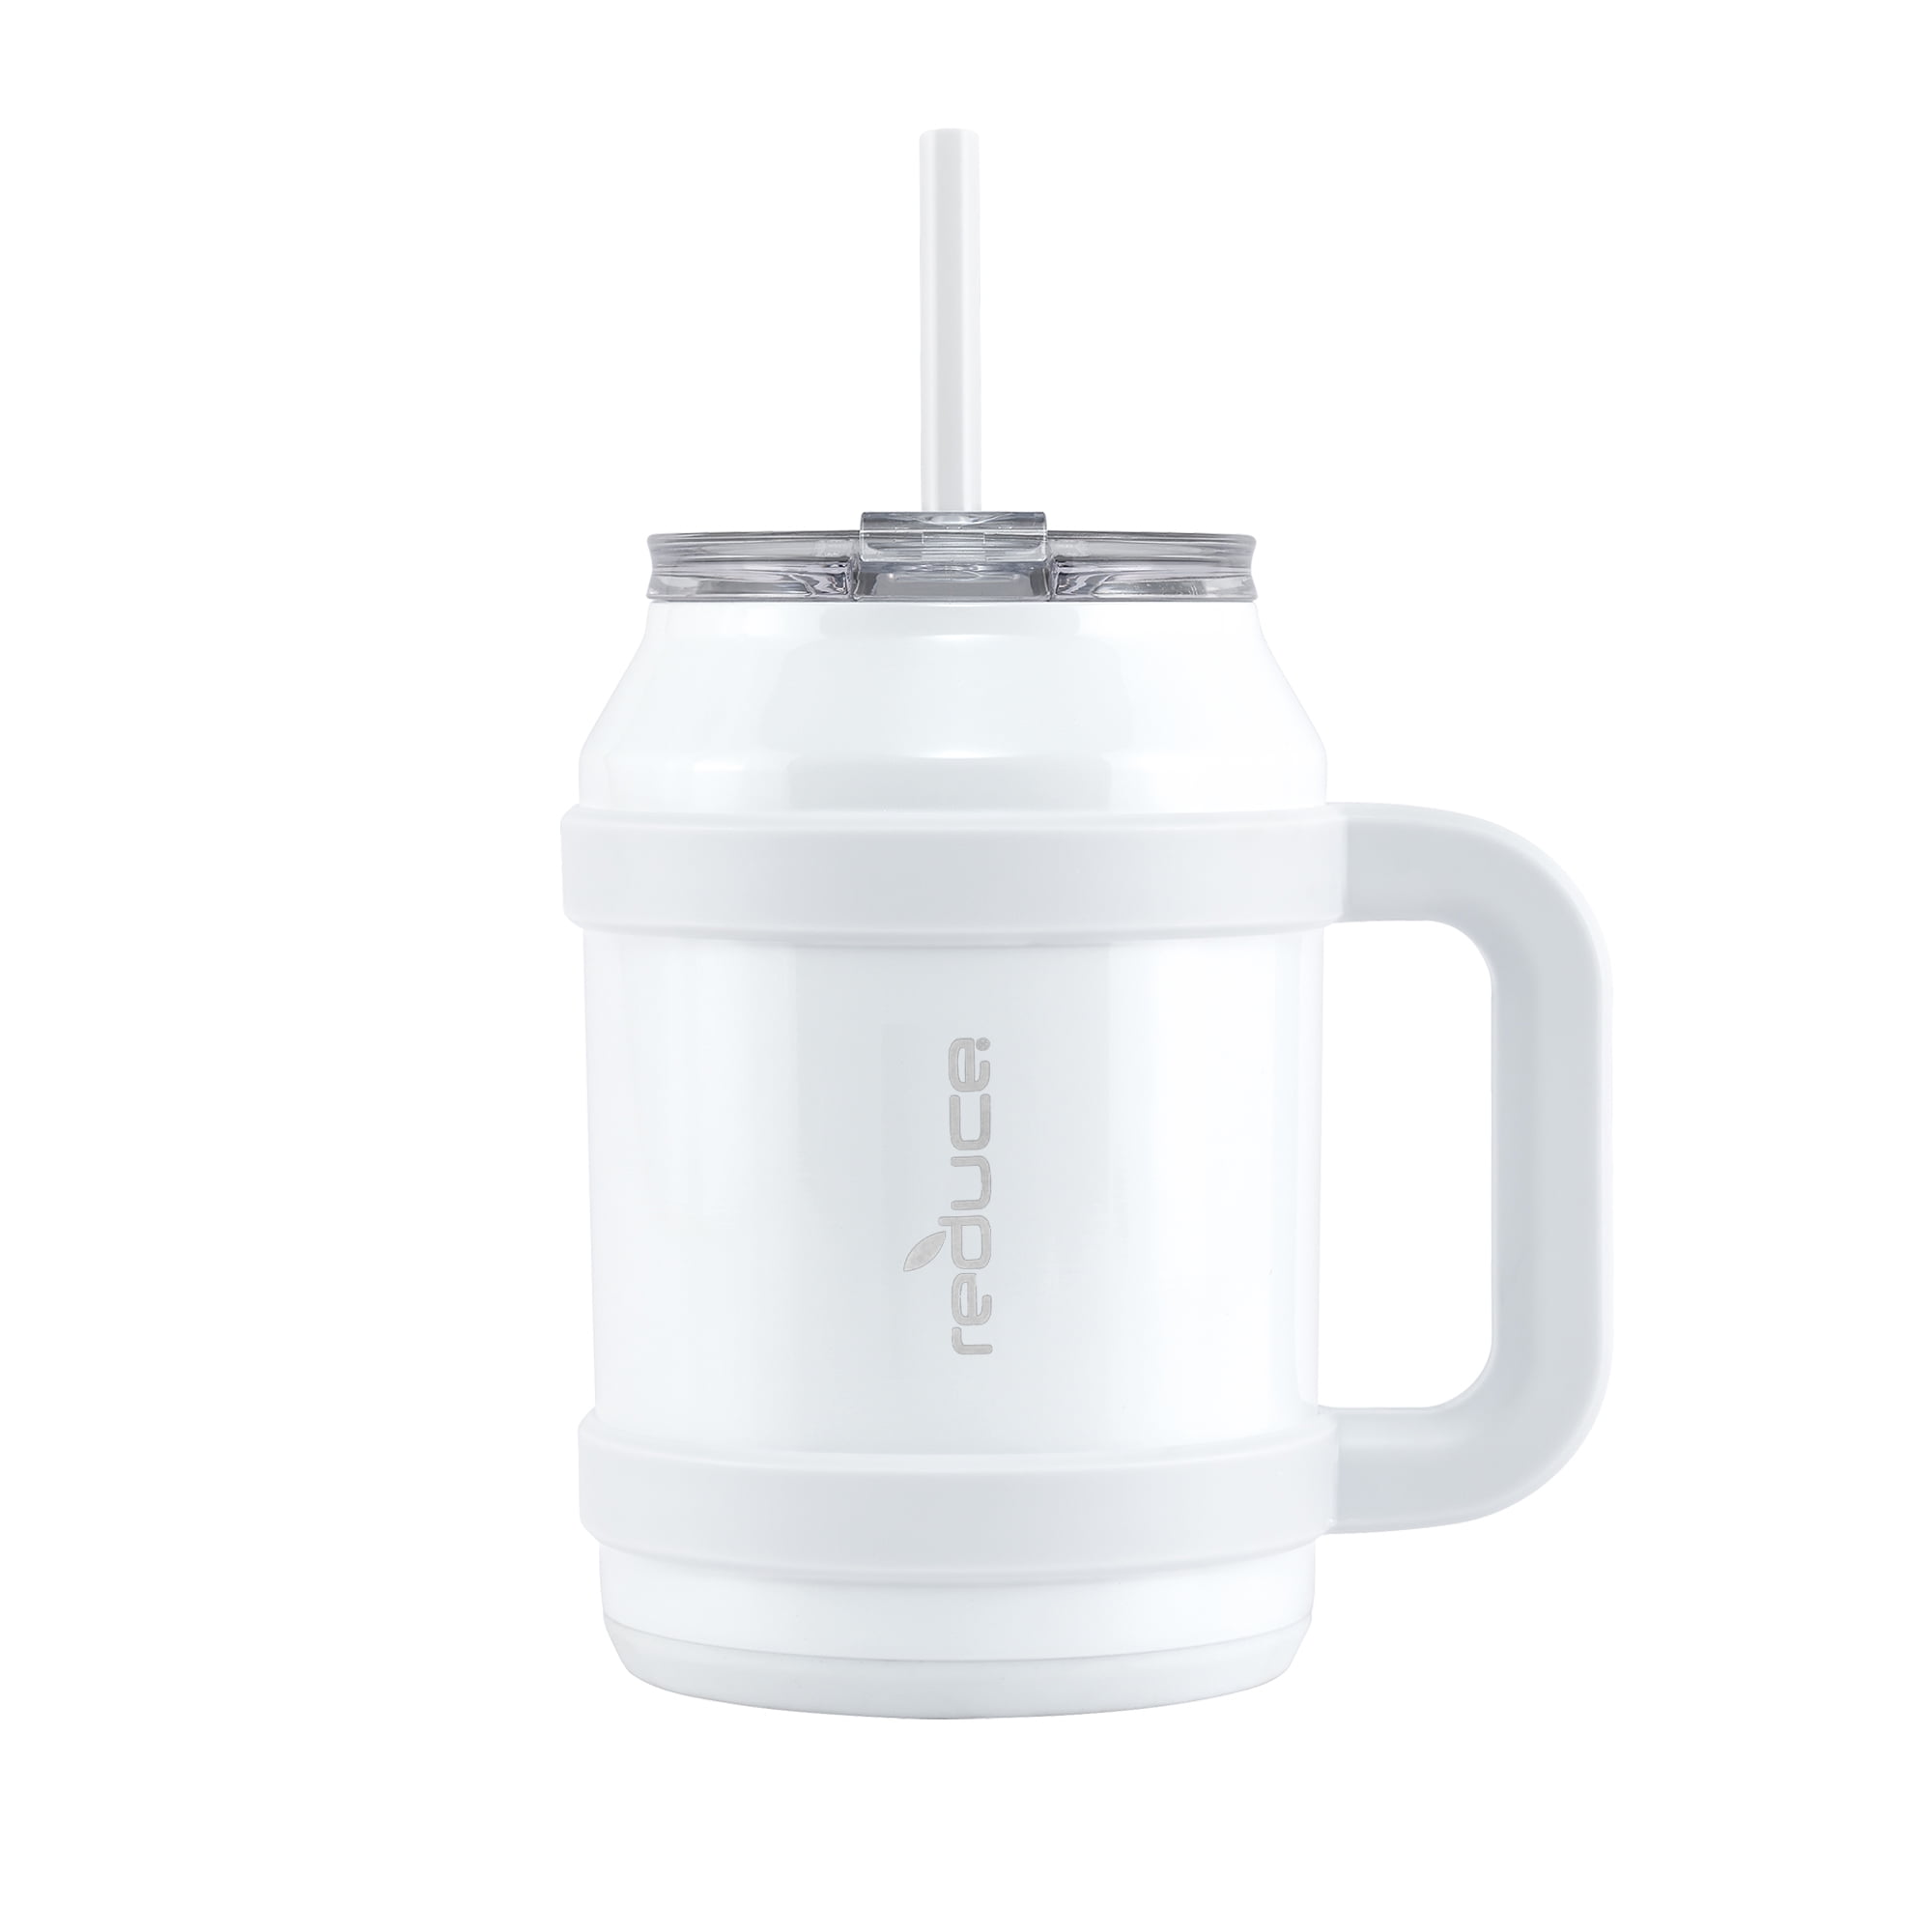 Narrow Drinking Cup Made Of Stainless Steel With Lid And Straw, 750 Ml,  Reusable, Vacuum-Insulated Water Cup, Double-Walled Travel Mug With A Straw  For Coffee, Tea, Drinks,Gray,F117821 